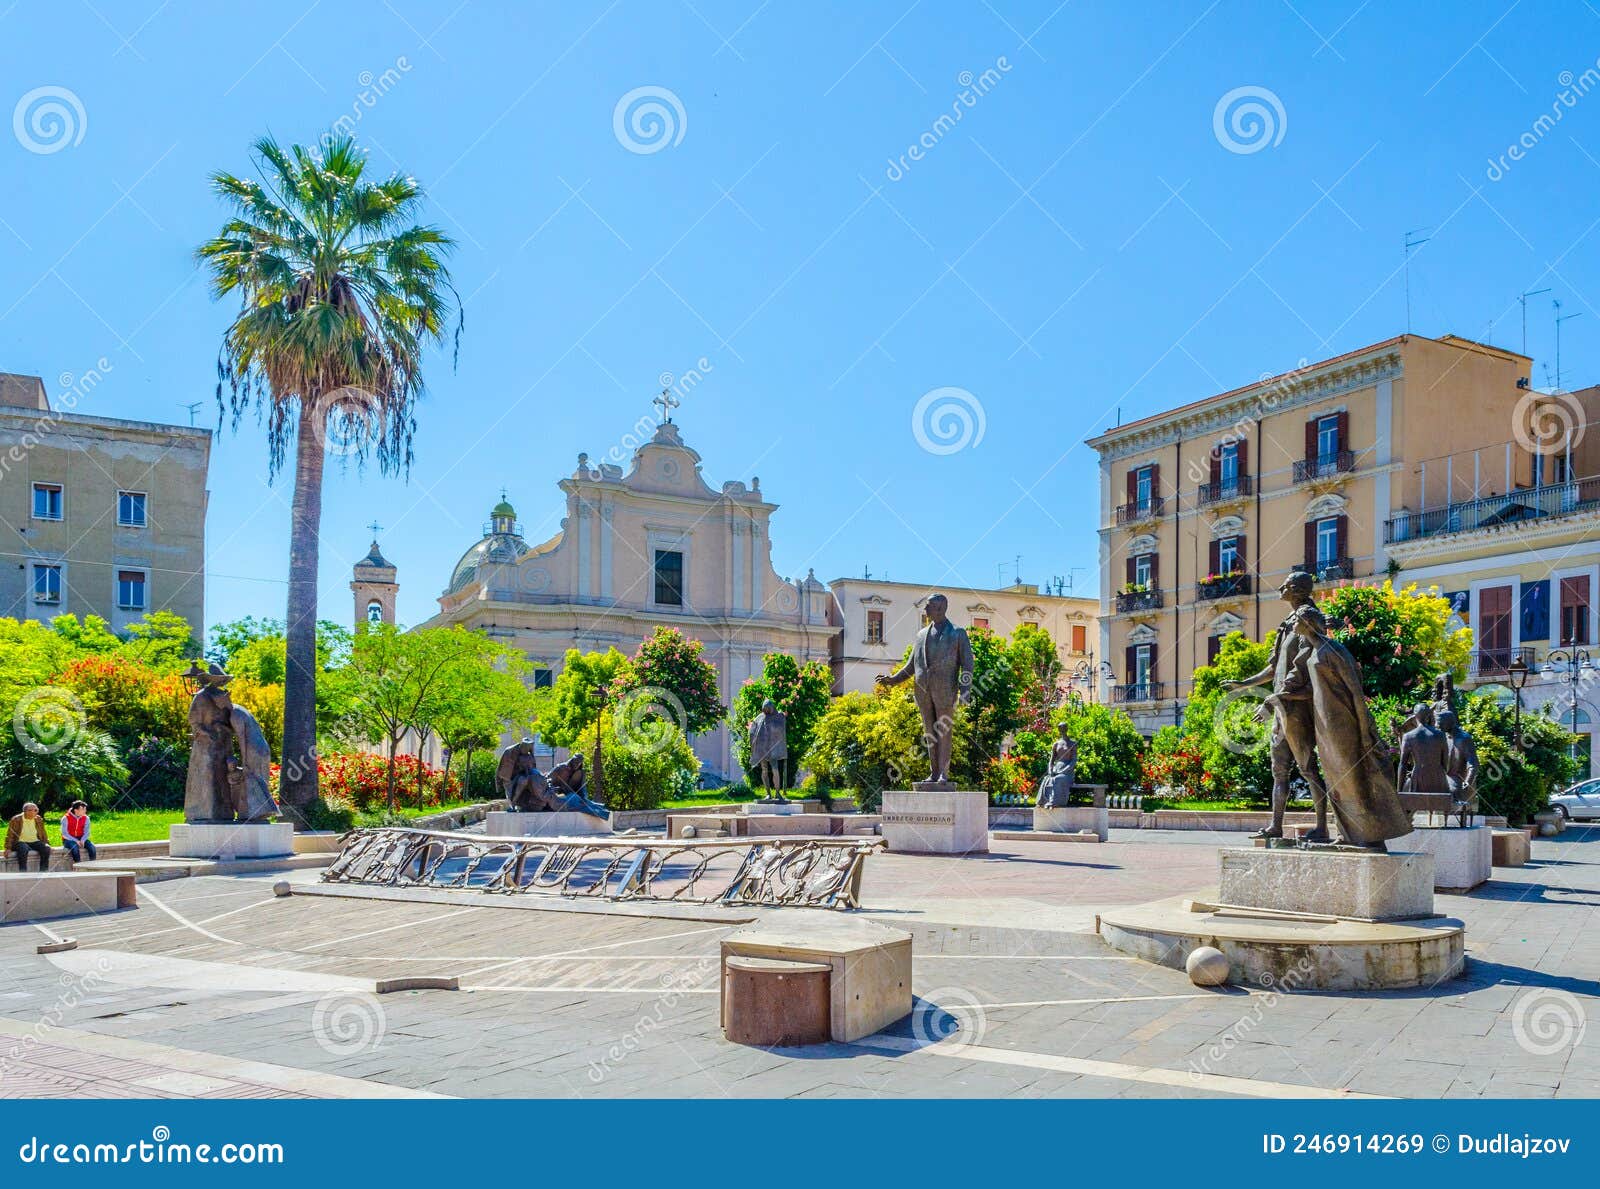 view of statues on piazza umberto giordano in foggia, italy....image